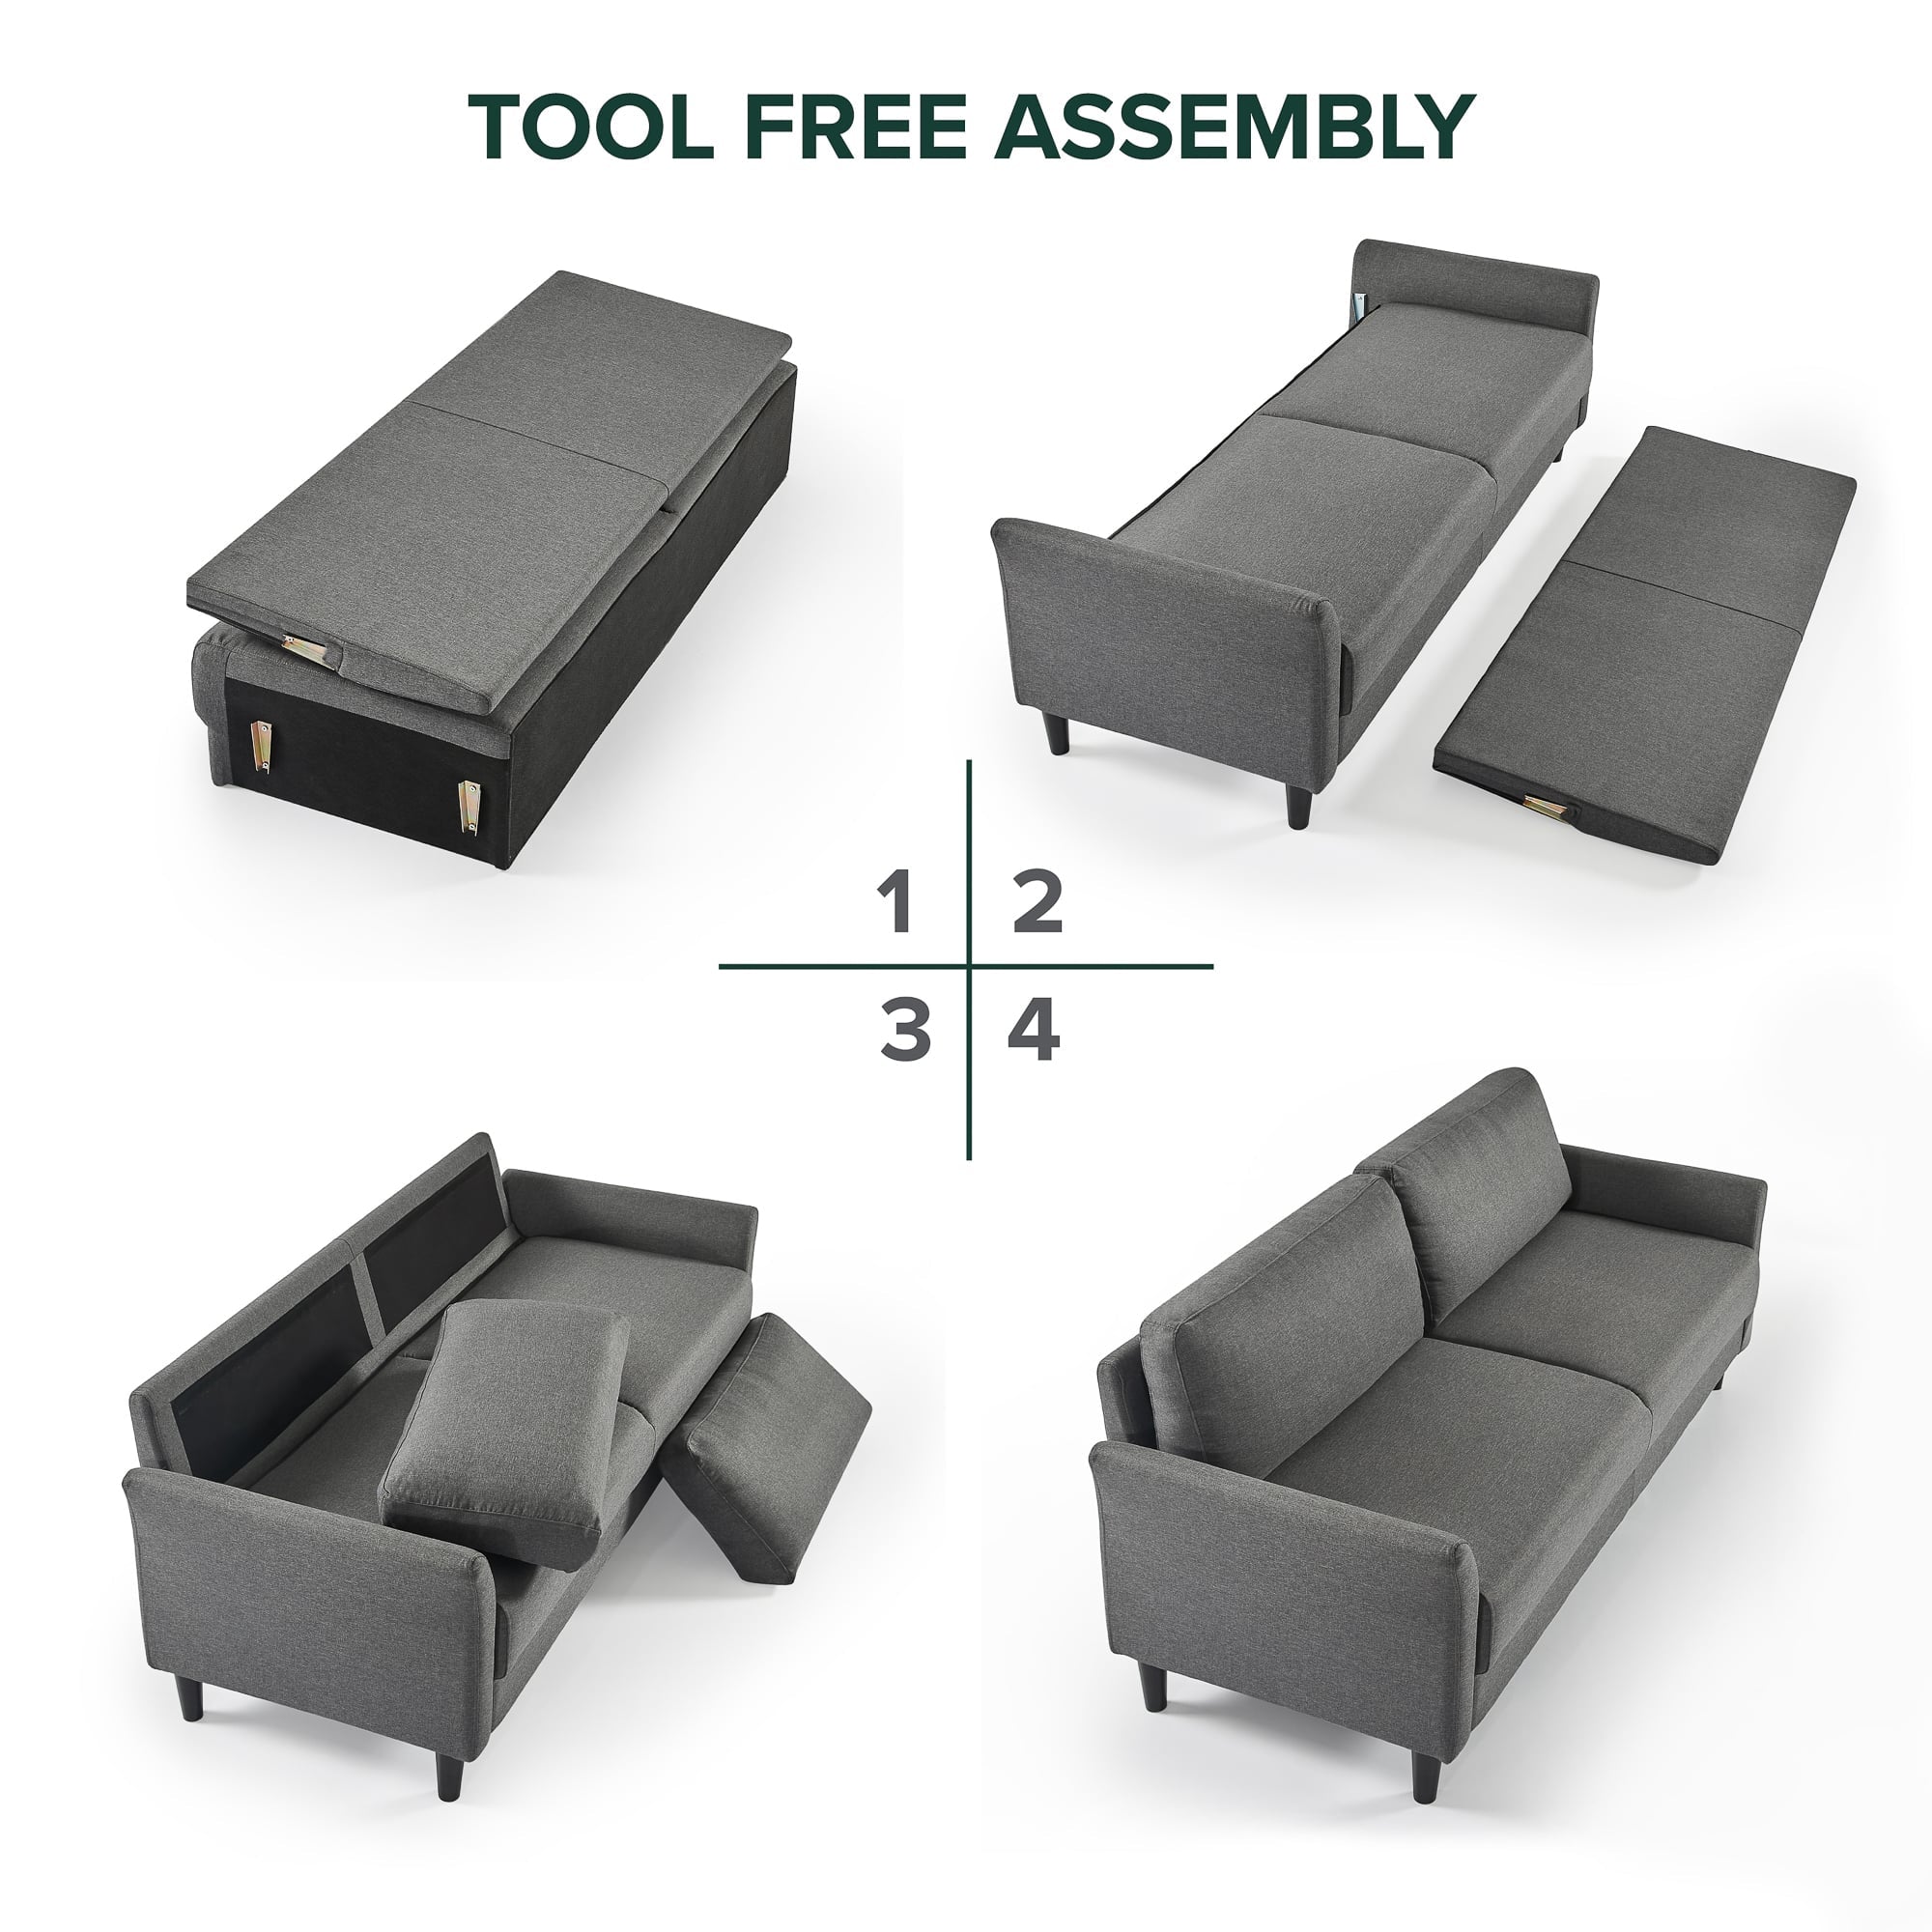 Jackie Classic Sofa assembly